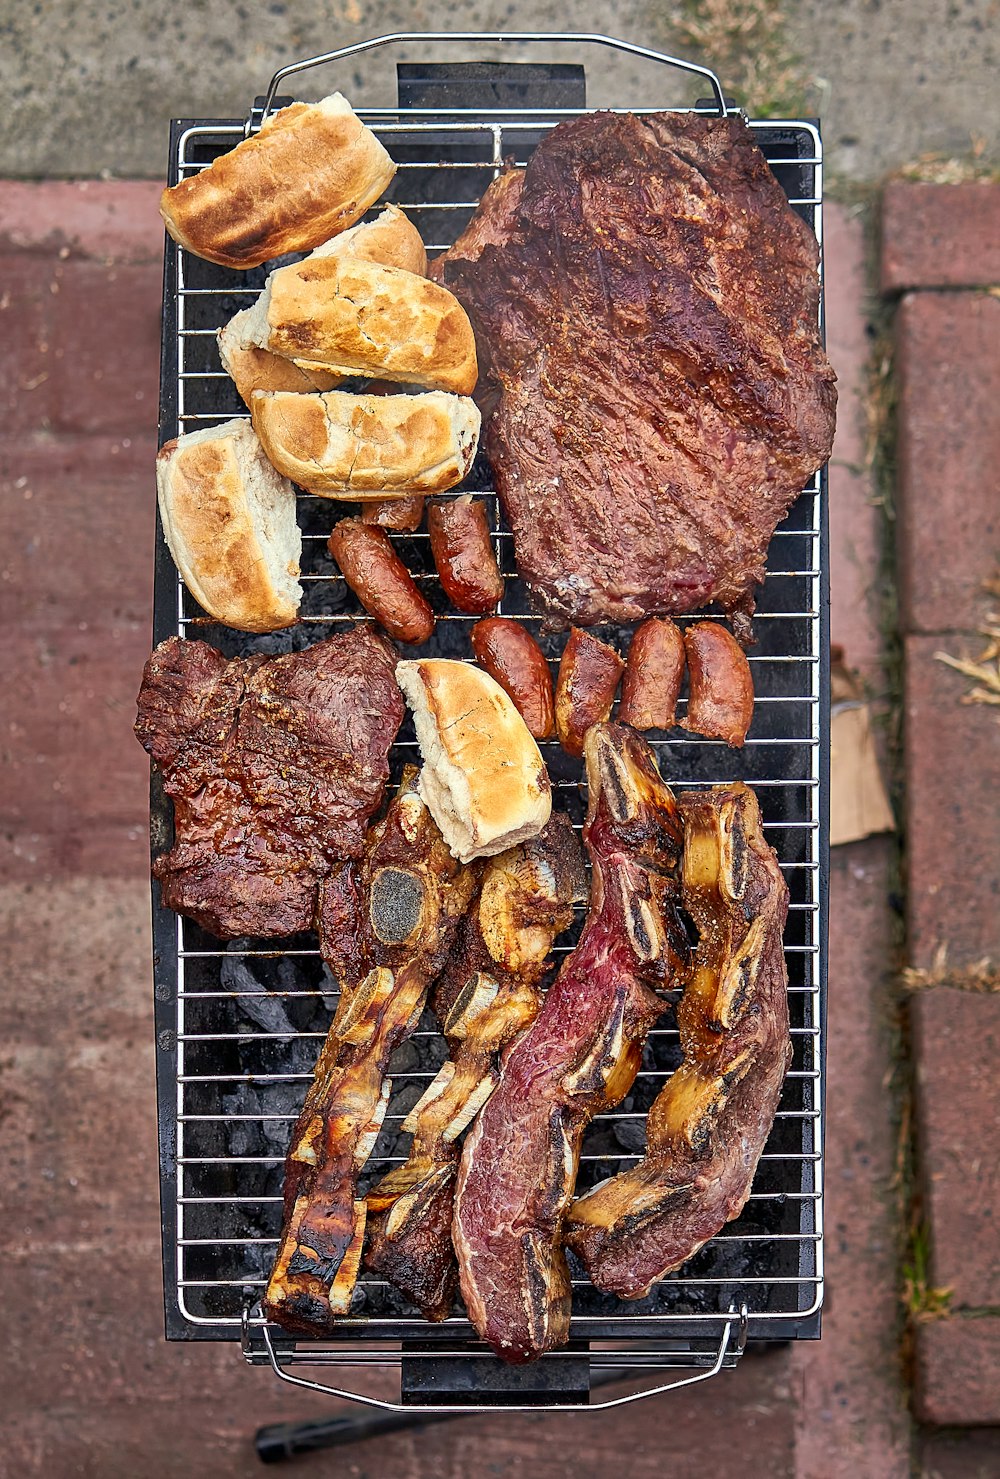 a bbq grill with a variety of meats on it